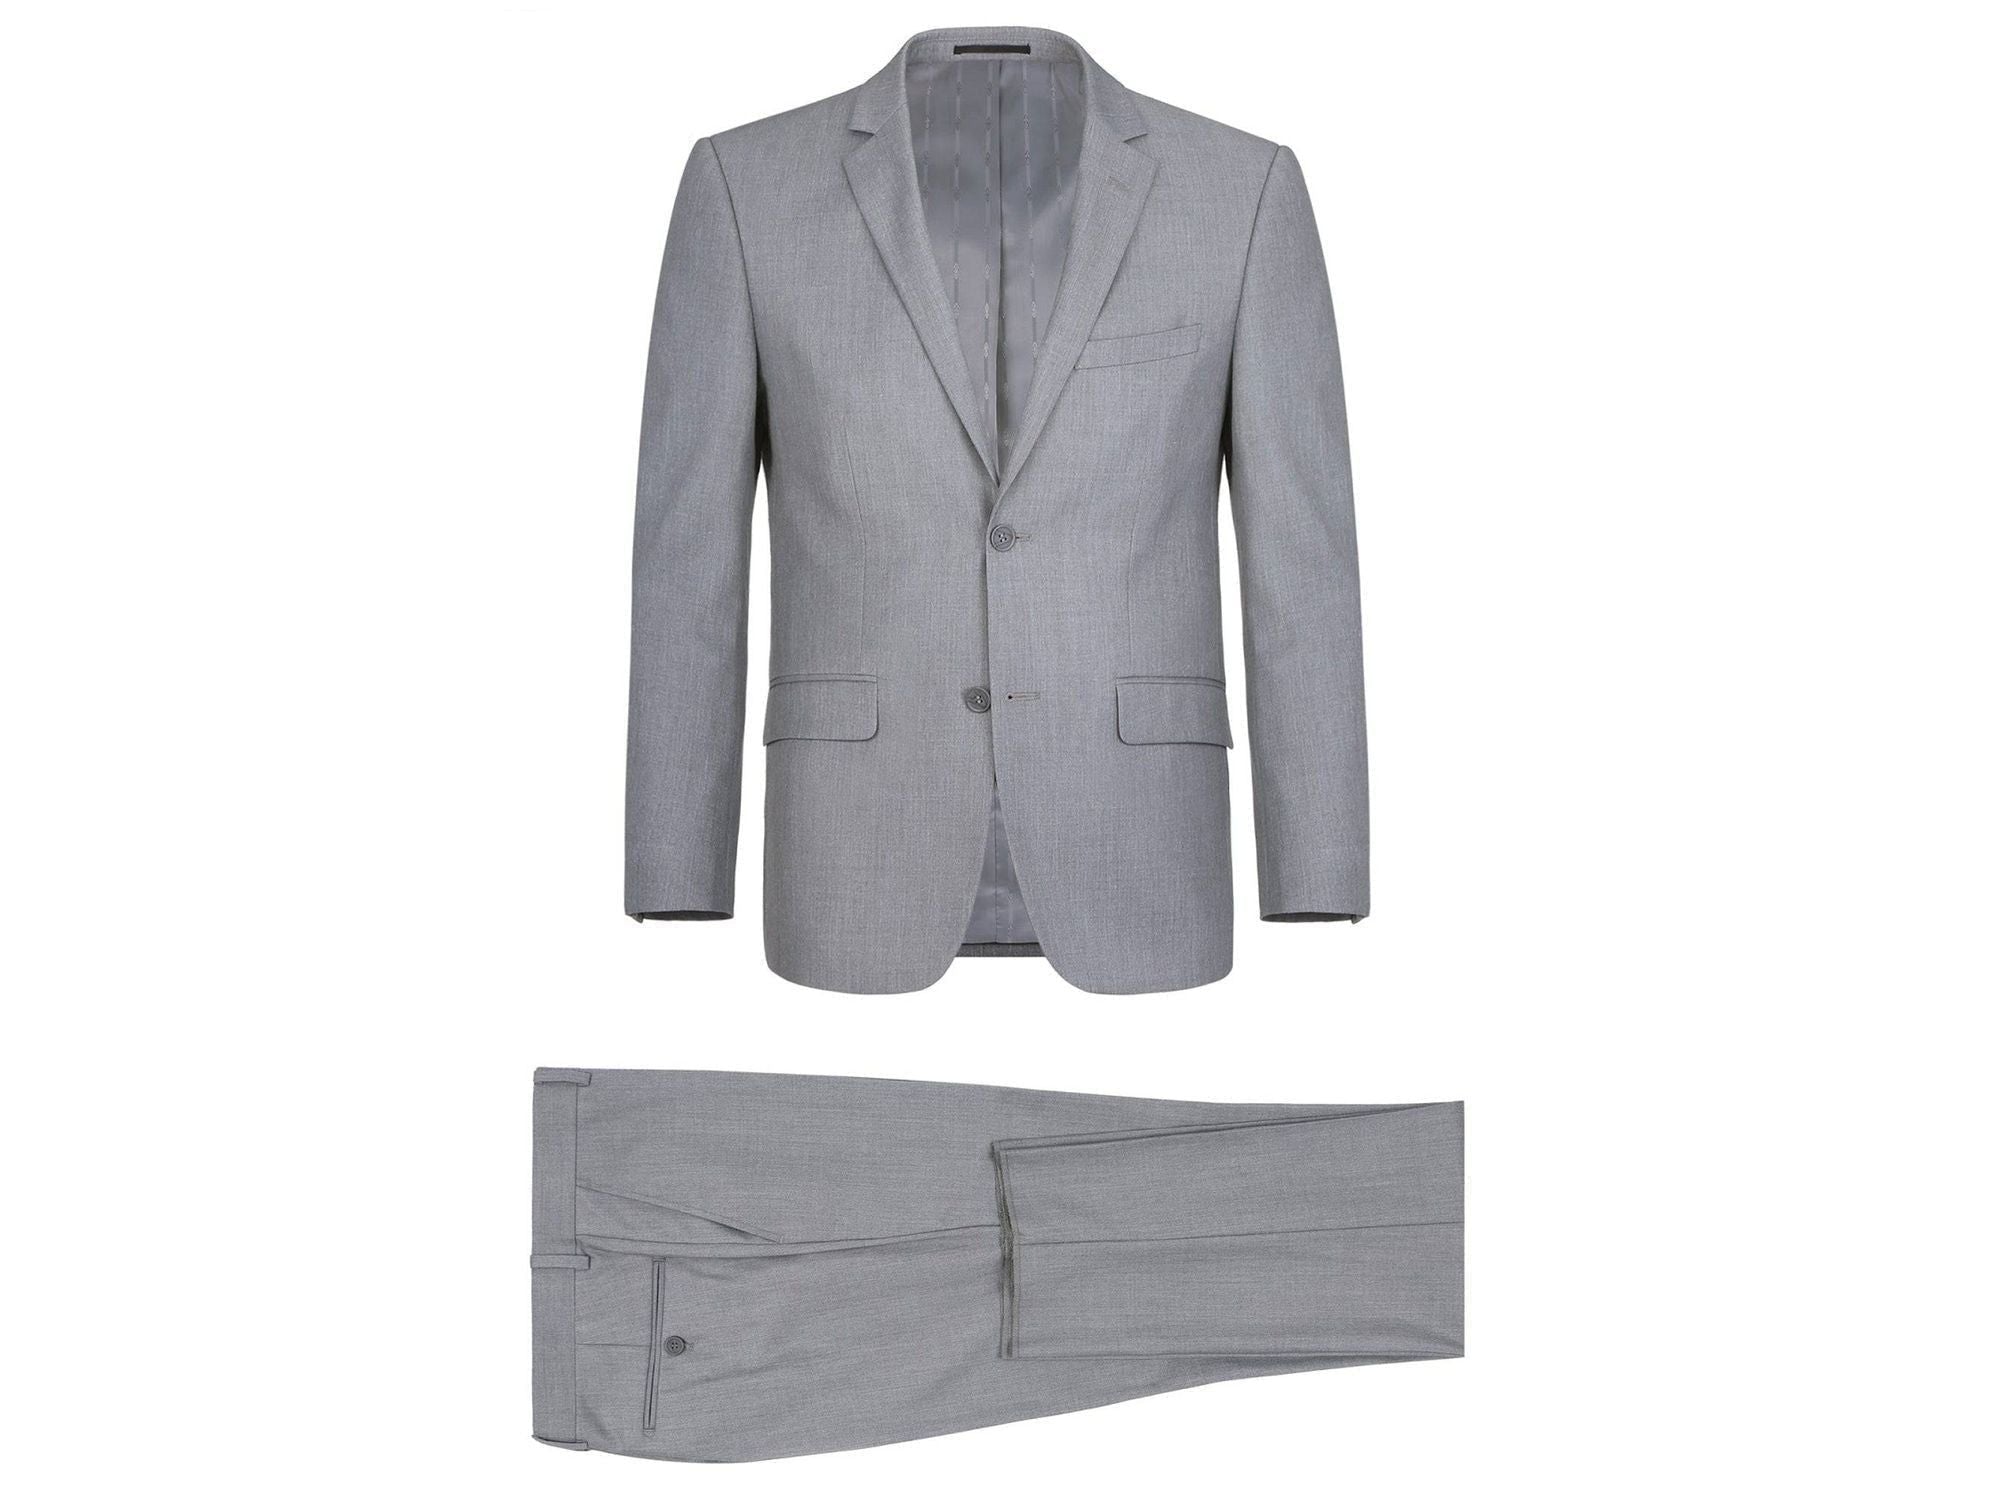 Rainwater's Fine Tropical Weight Man Made Fabric Slim Fit Suit In Light Grey - Rainwater's Men's Clothing and Tuxedo Rental